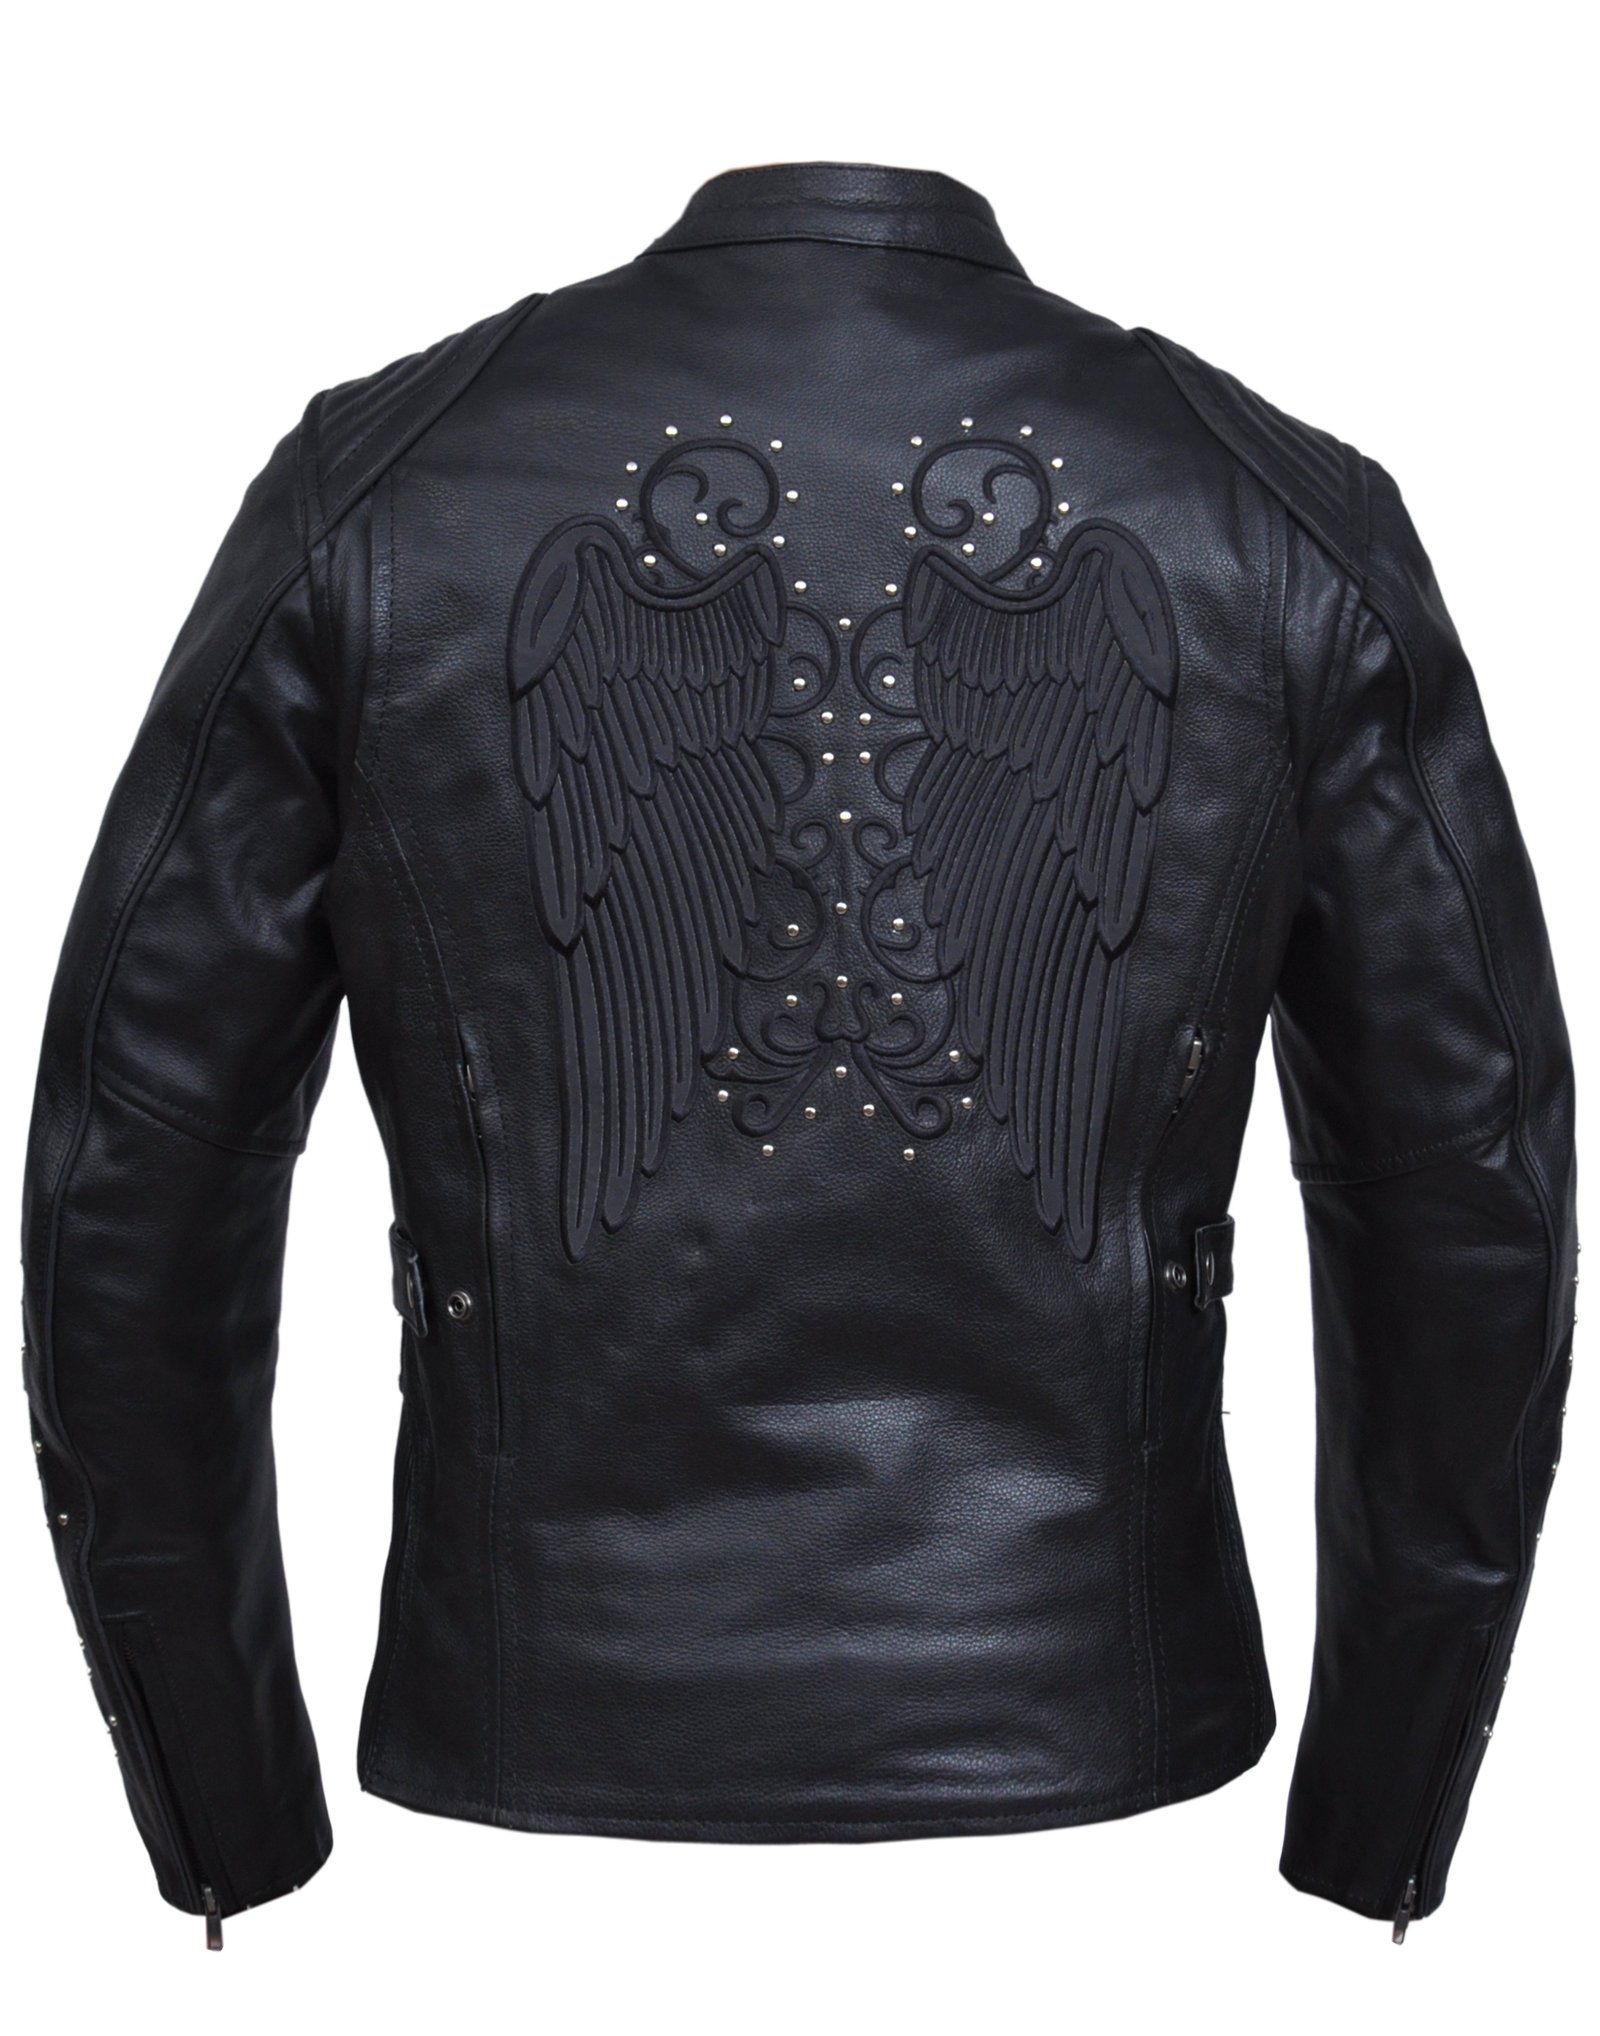 Leather Motorcycle Jacket - Women's - Reflective Wings - Studs Design - 6824-RF-UN